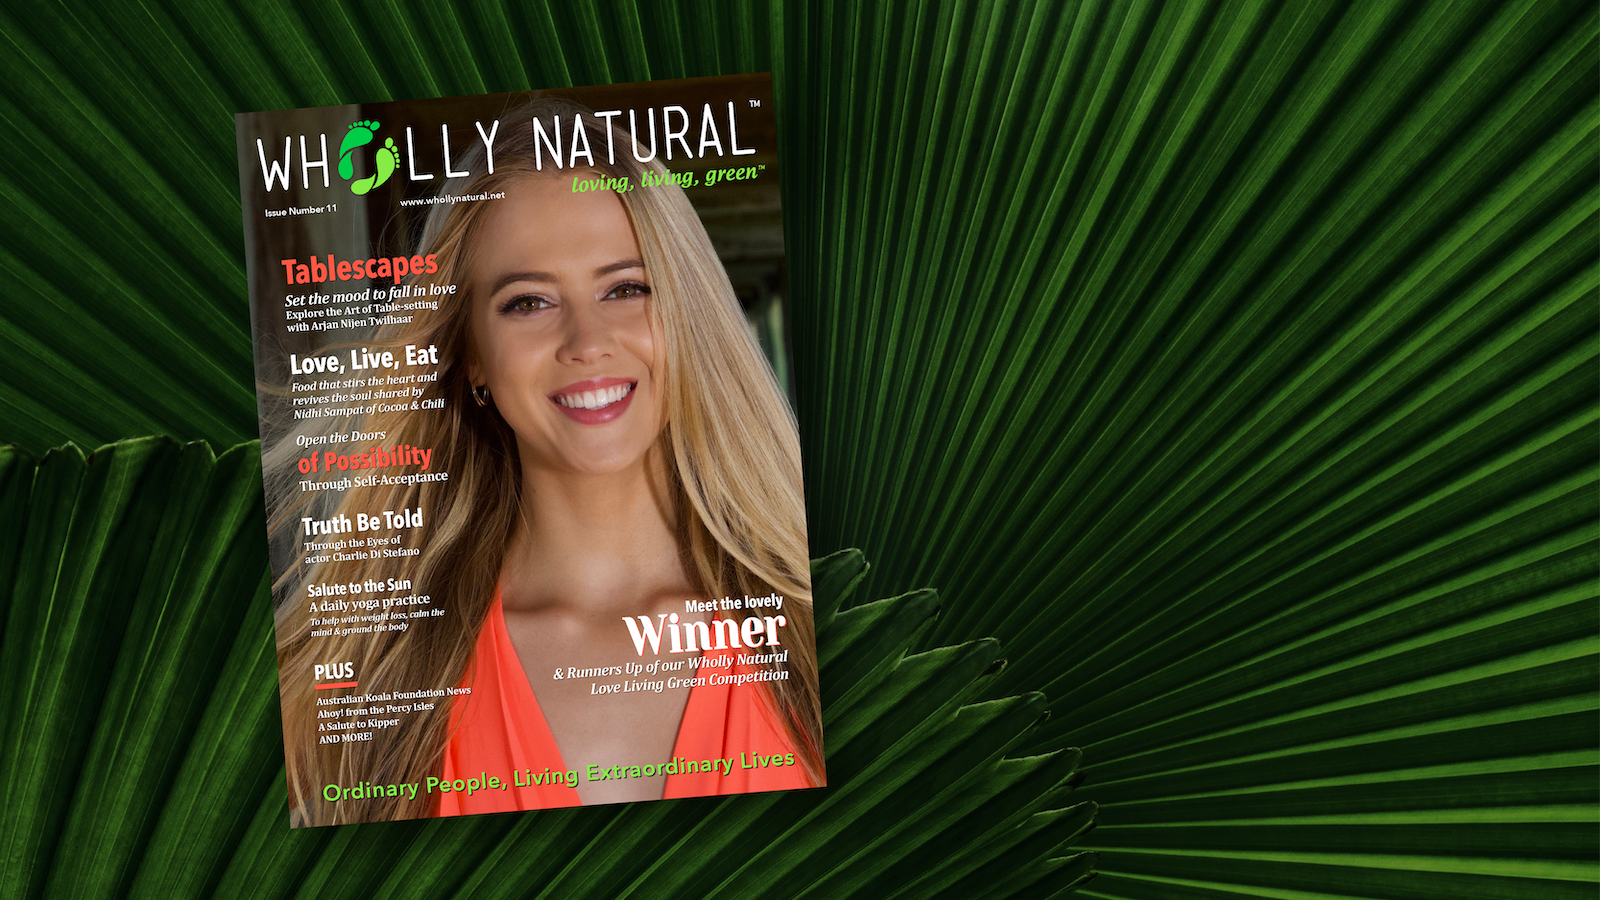 Introducing Wholly Natural Magazine Issue 11. Issue 11 cover on a background of Ruffled Fan Palm leaves